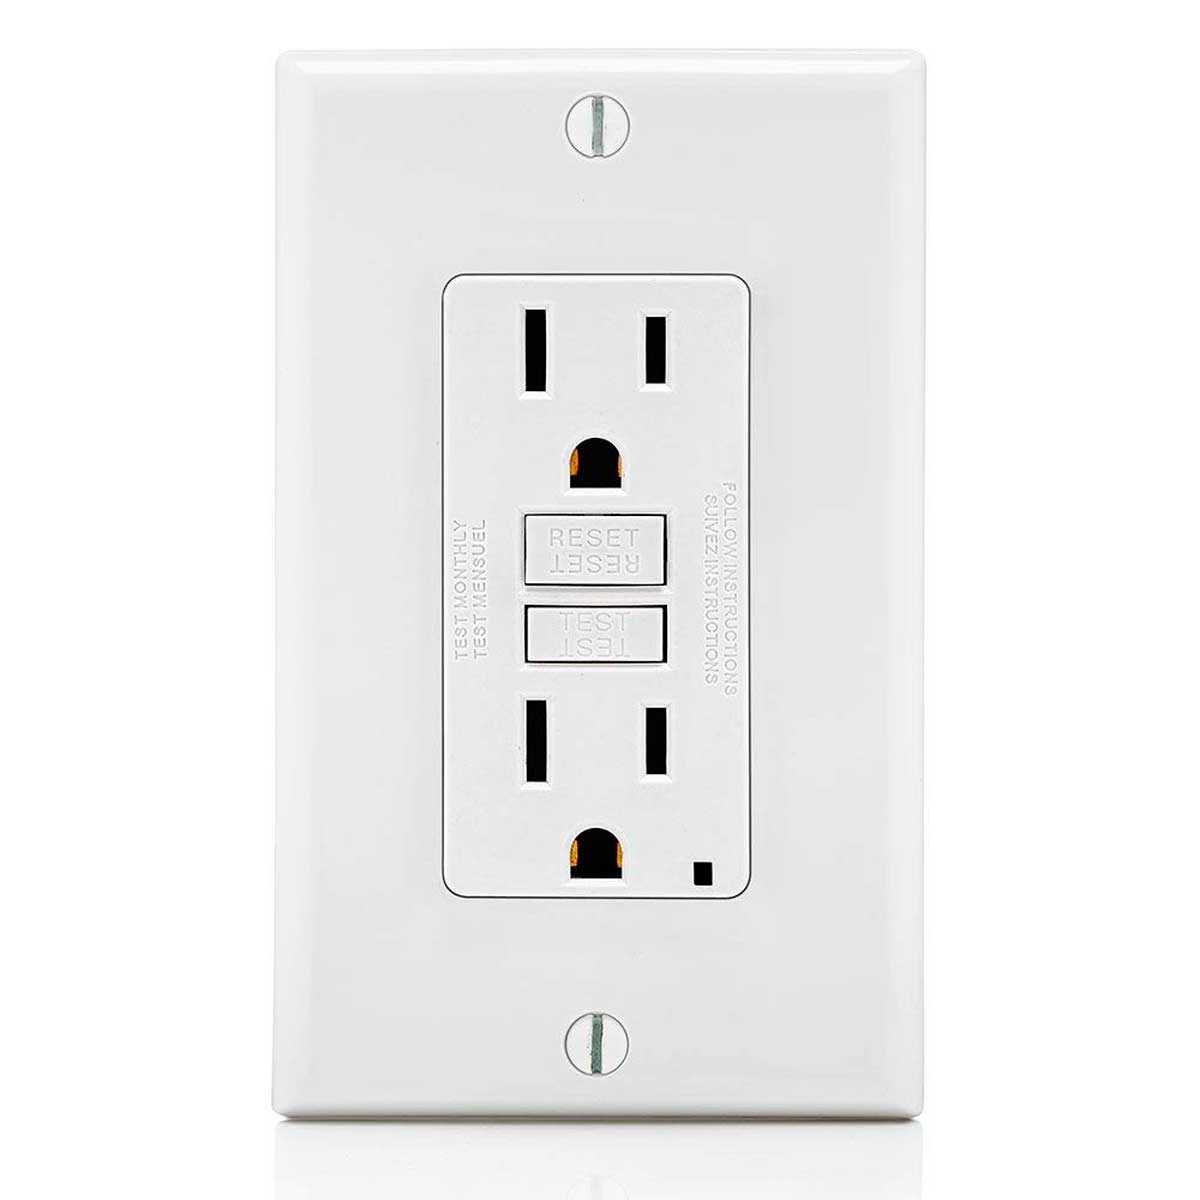 6 Electrical Outlets That Maximize Safety and Convenience